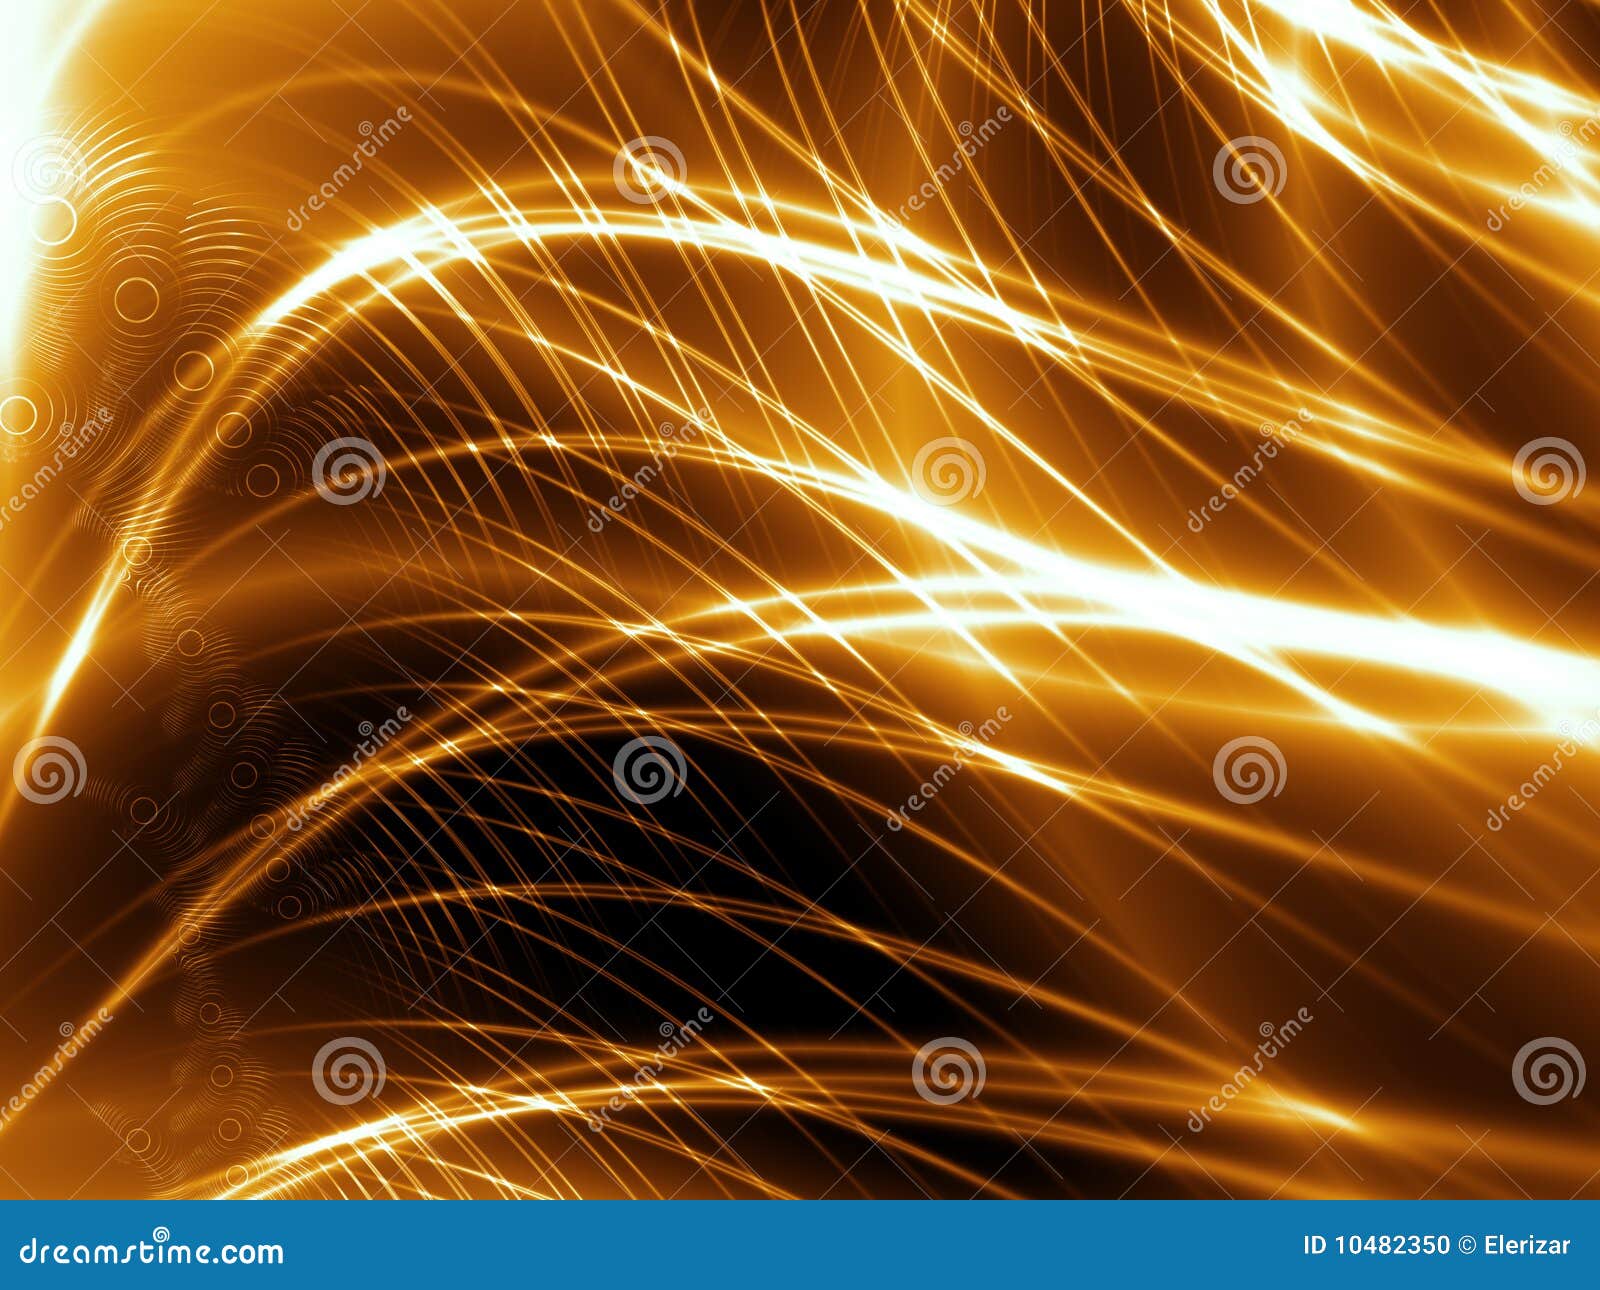 Abstract gold lines stock illustration. Illustration of gold - 10482350